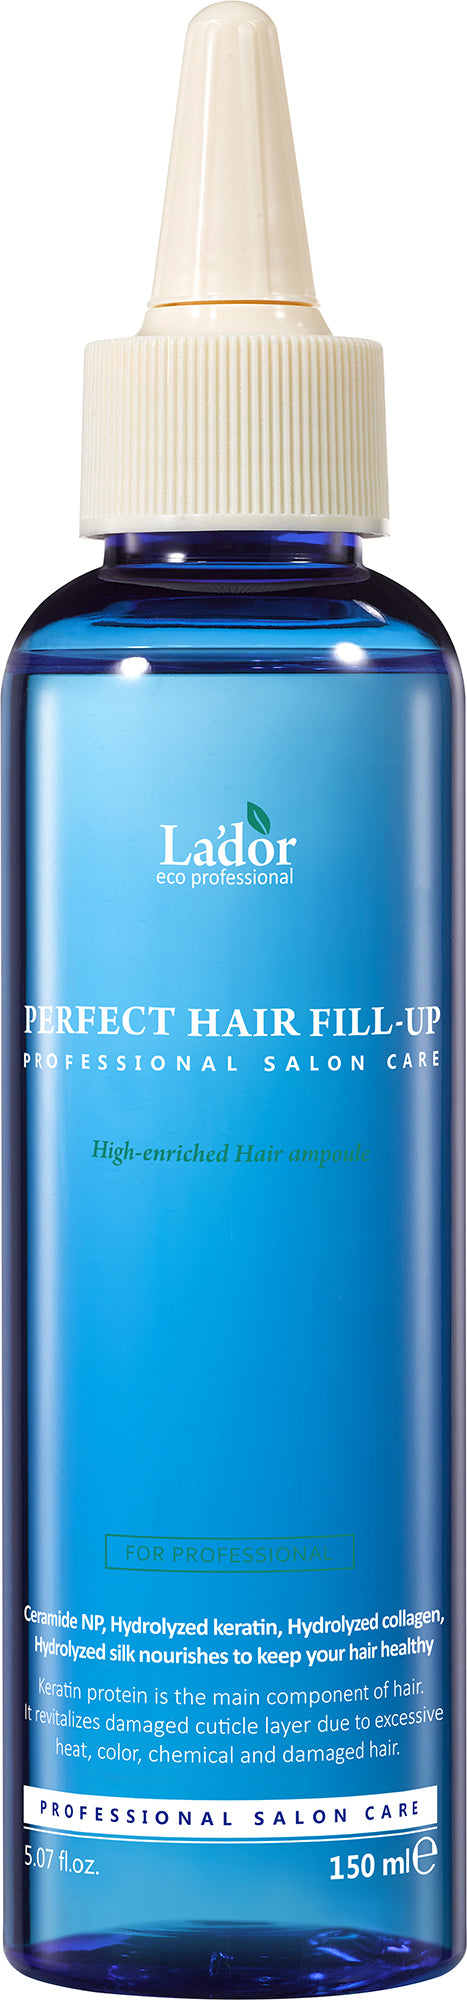 Lador Perfect Hair Fill Up 150ml